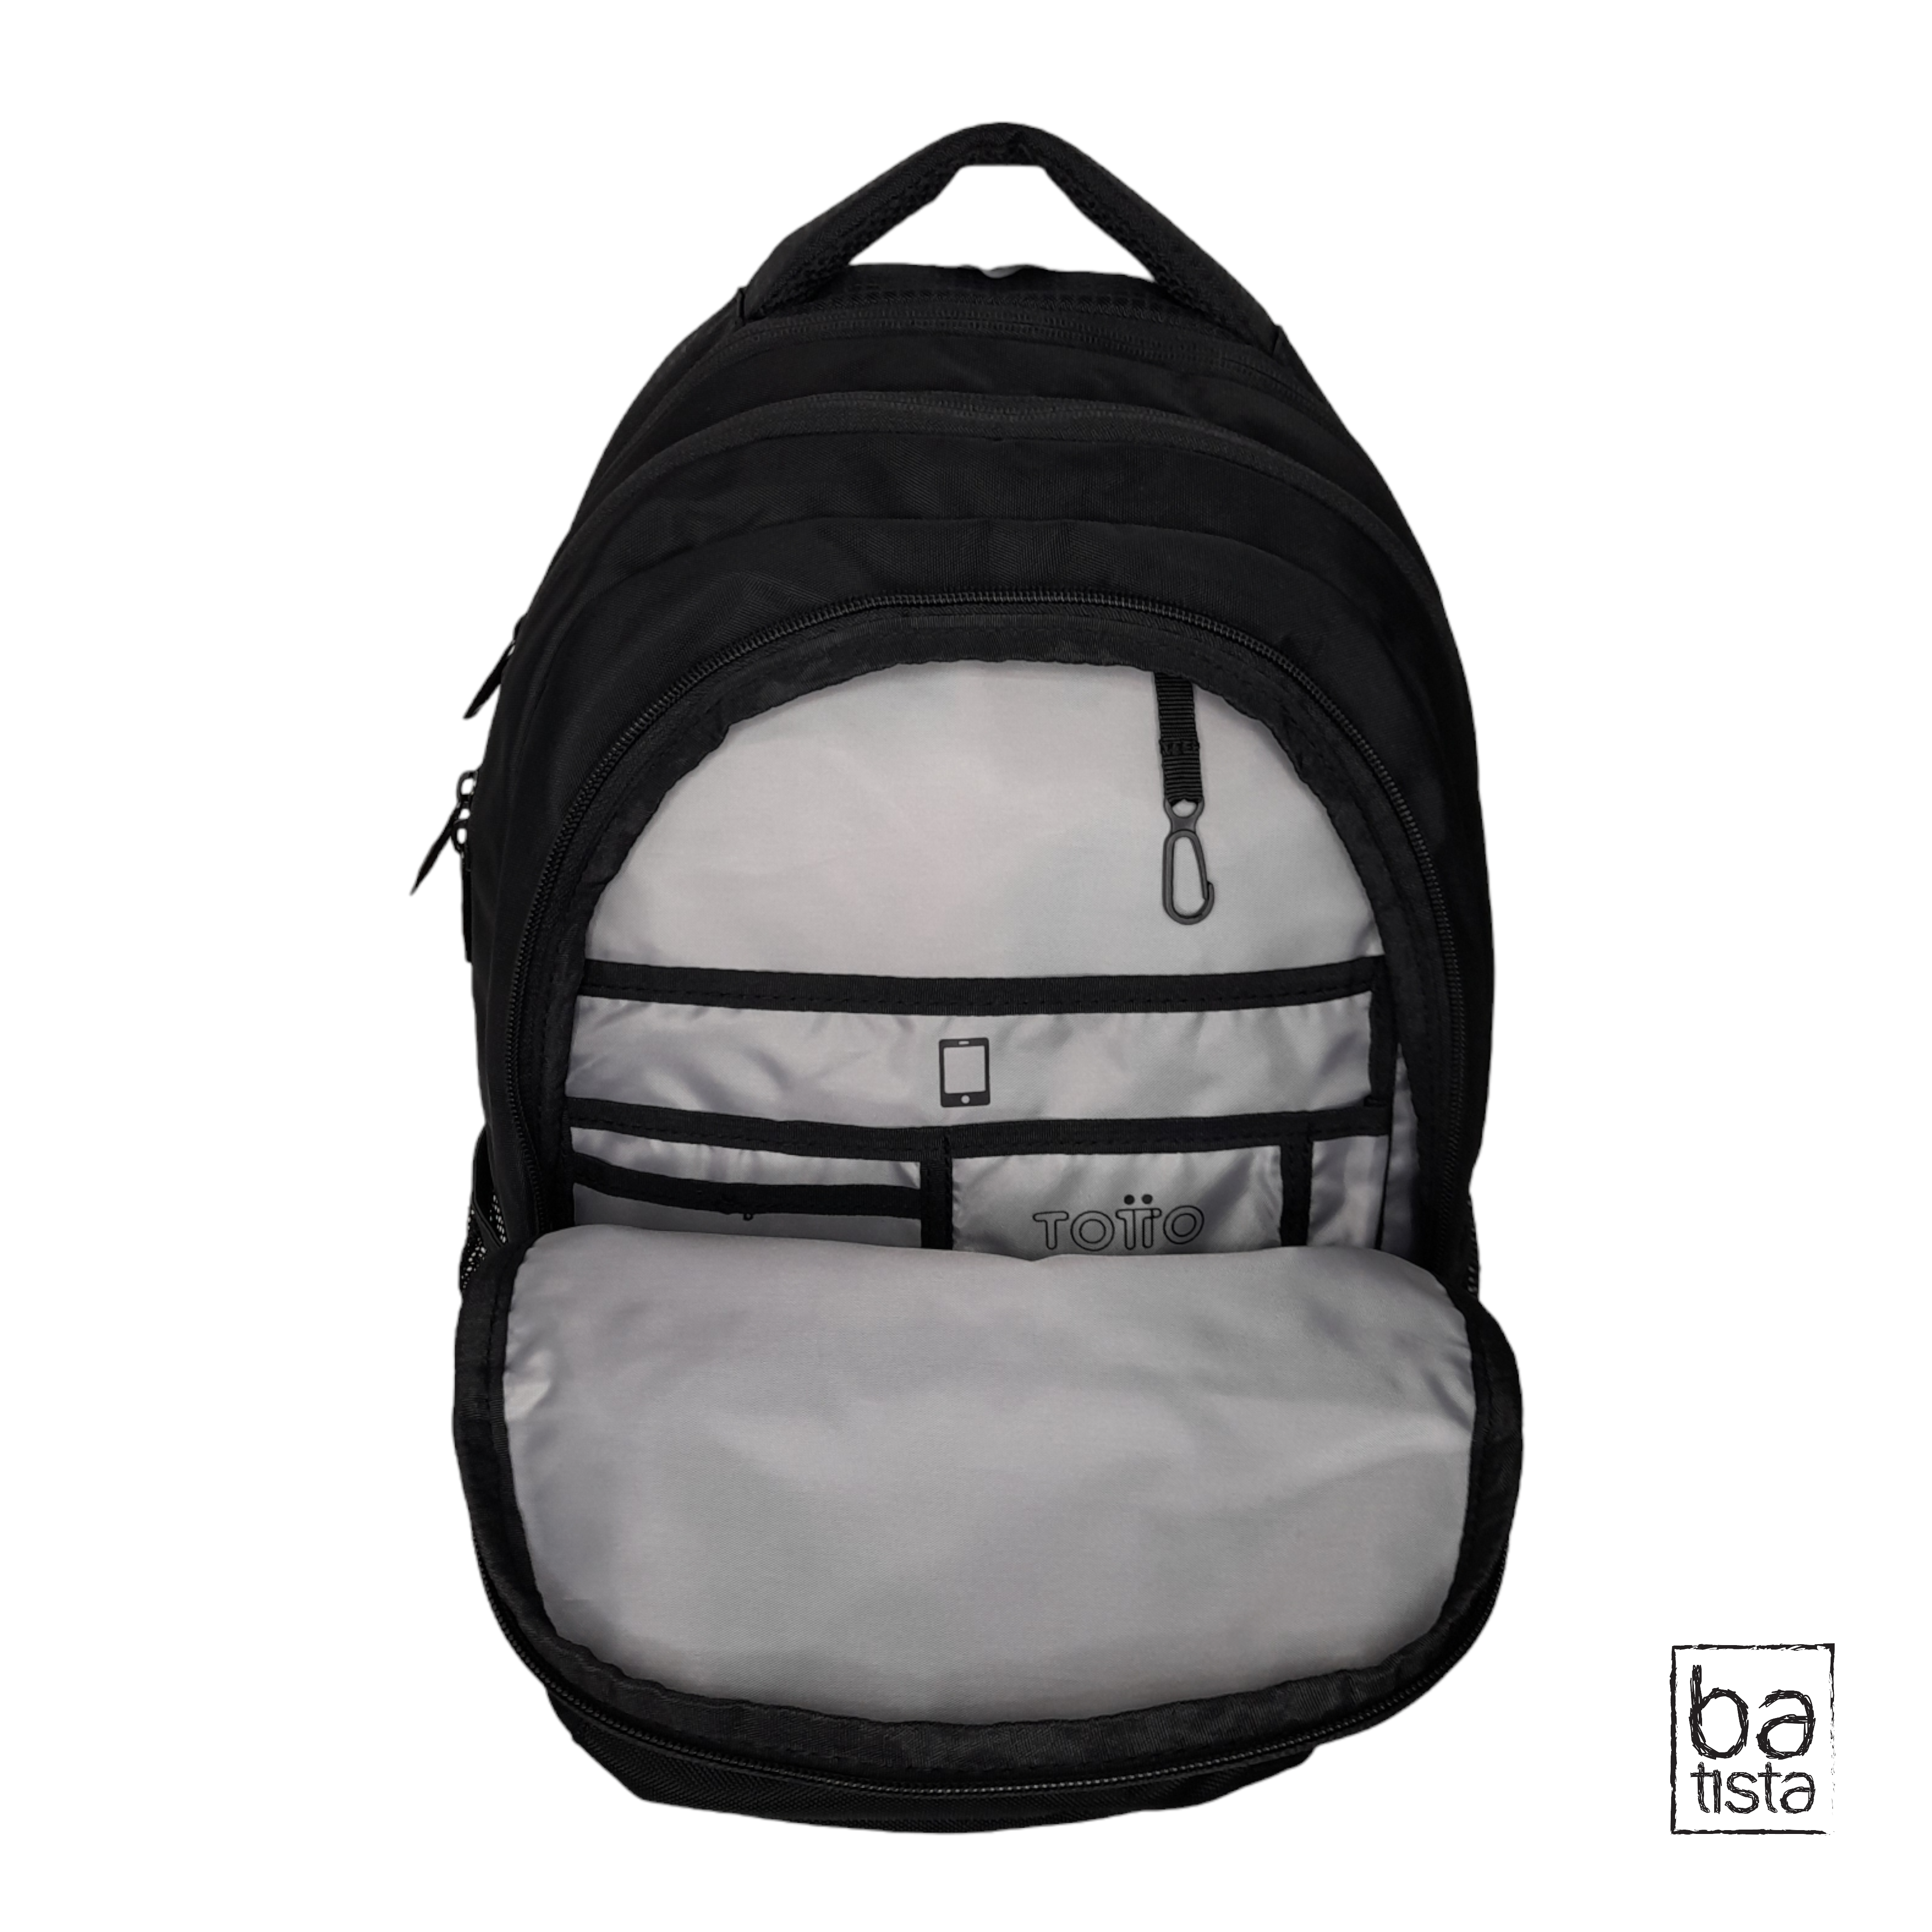 Morral Totto Titany N01 38.42 Lts.